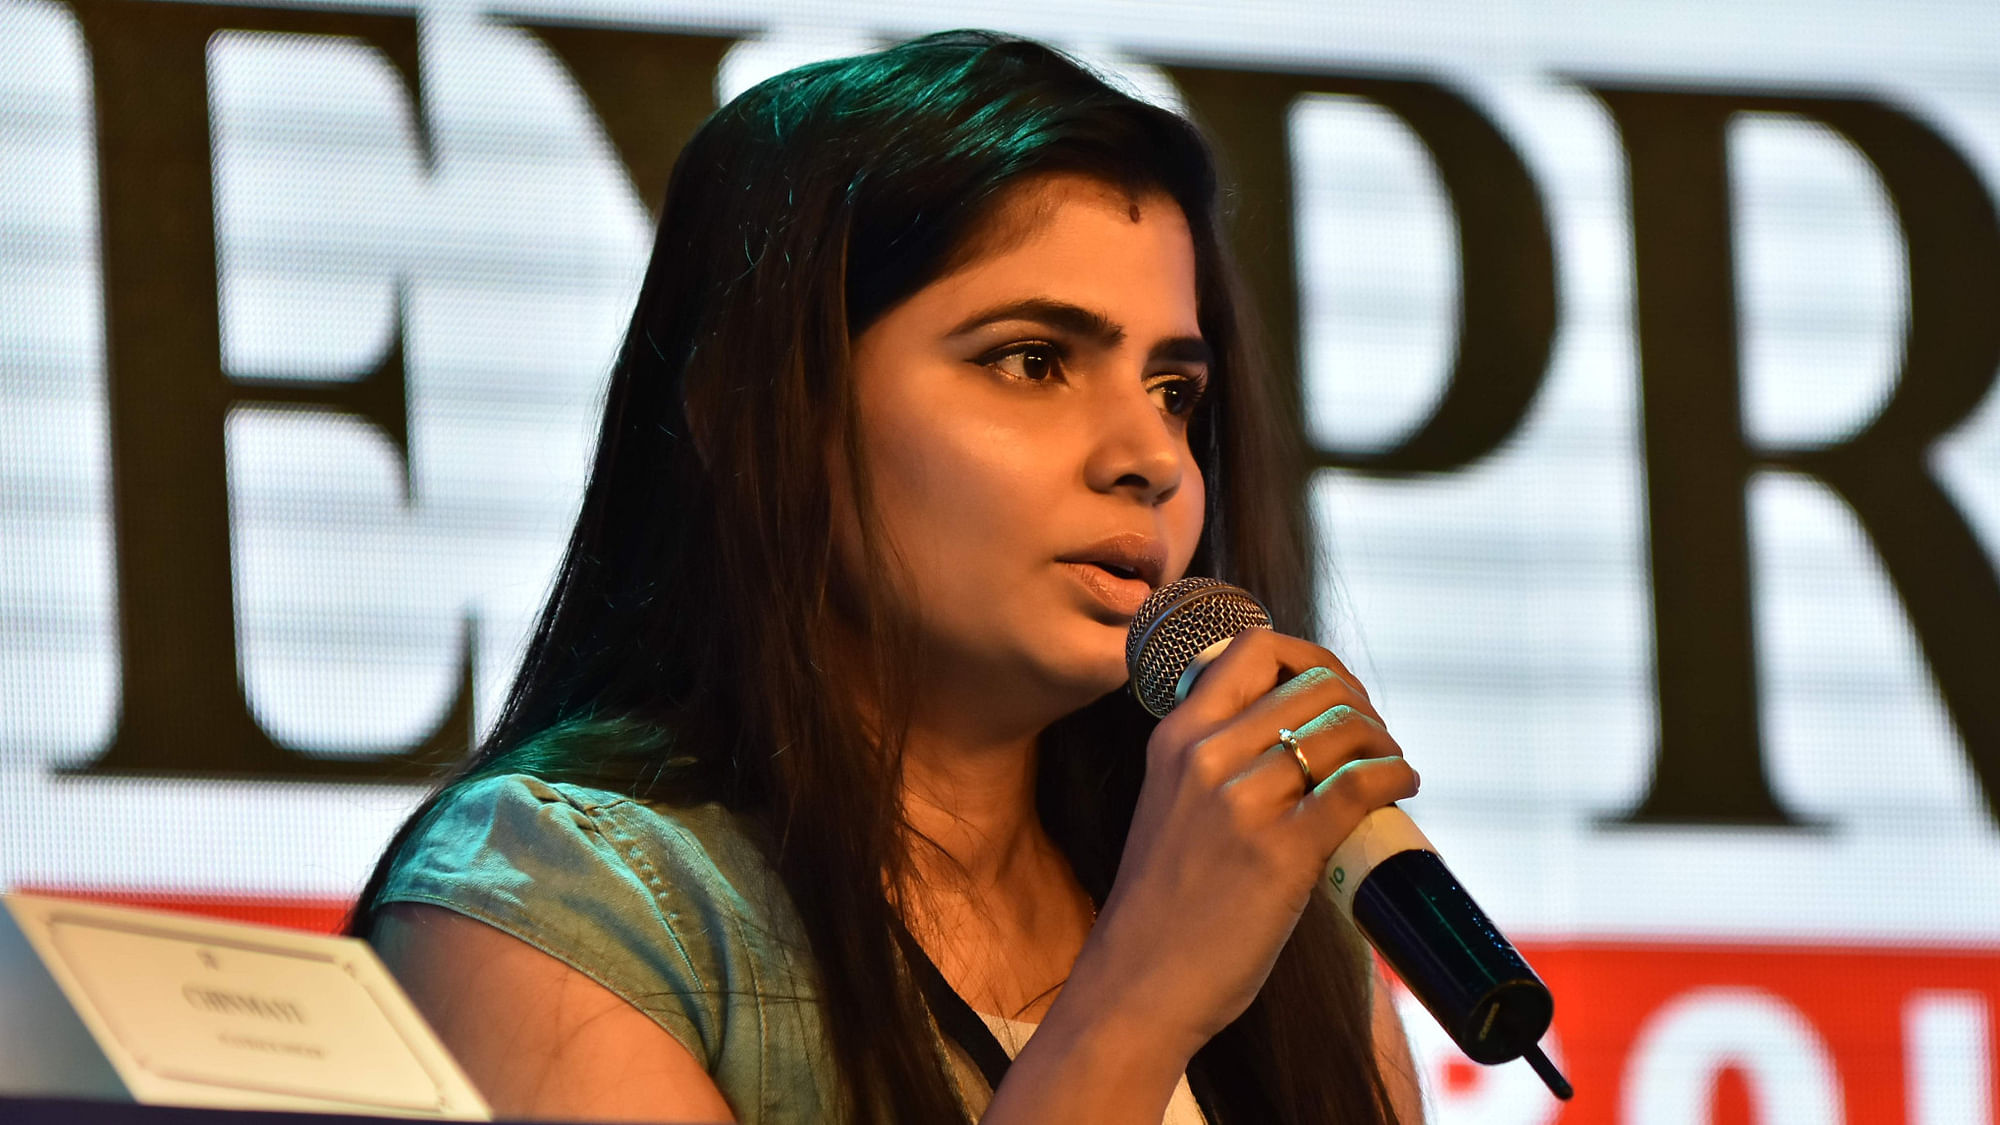 Earlier this year, Chinmayi made allegations of sexual misconduct against lyricist Vairamuthu, and supported women who spoke up against Radha Ravi who heads the Dubbing Artistes Union.